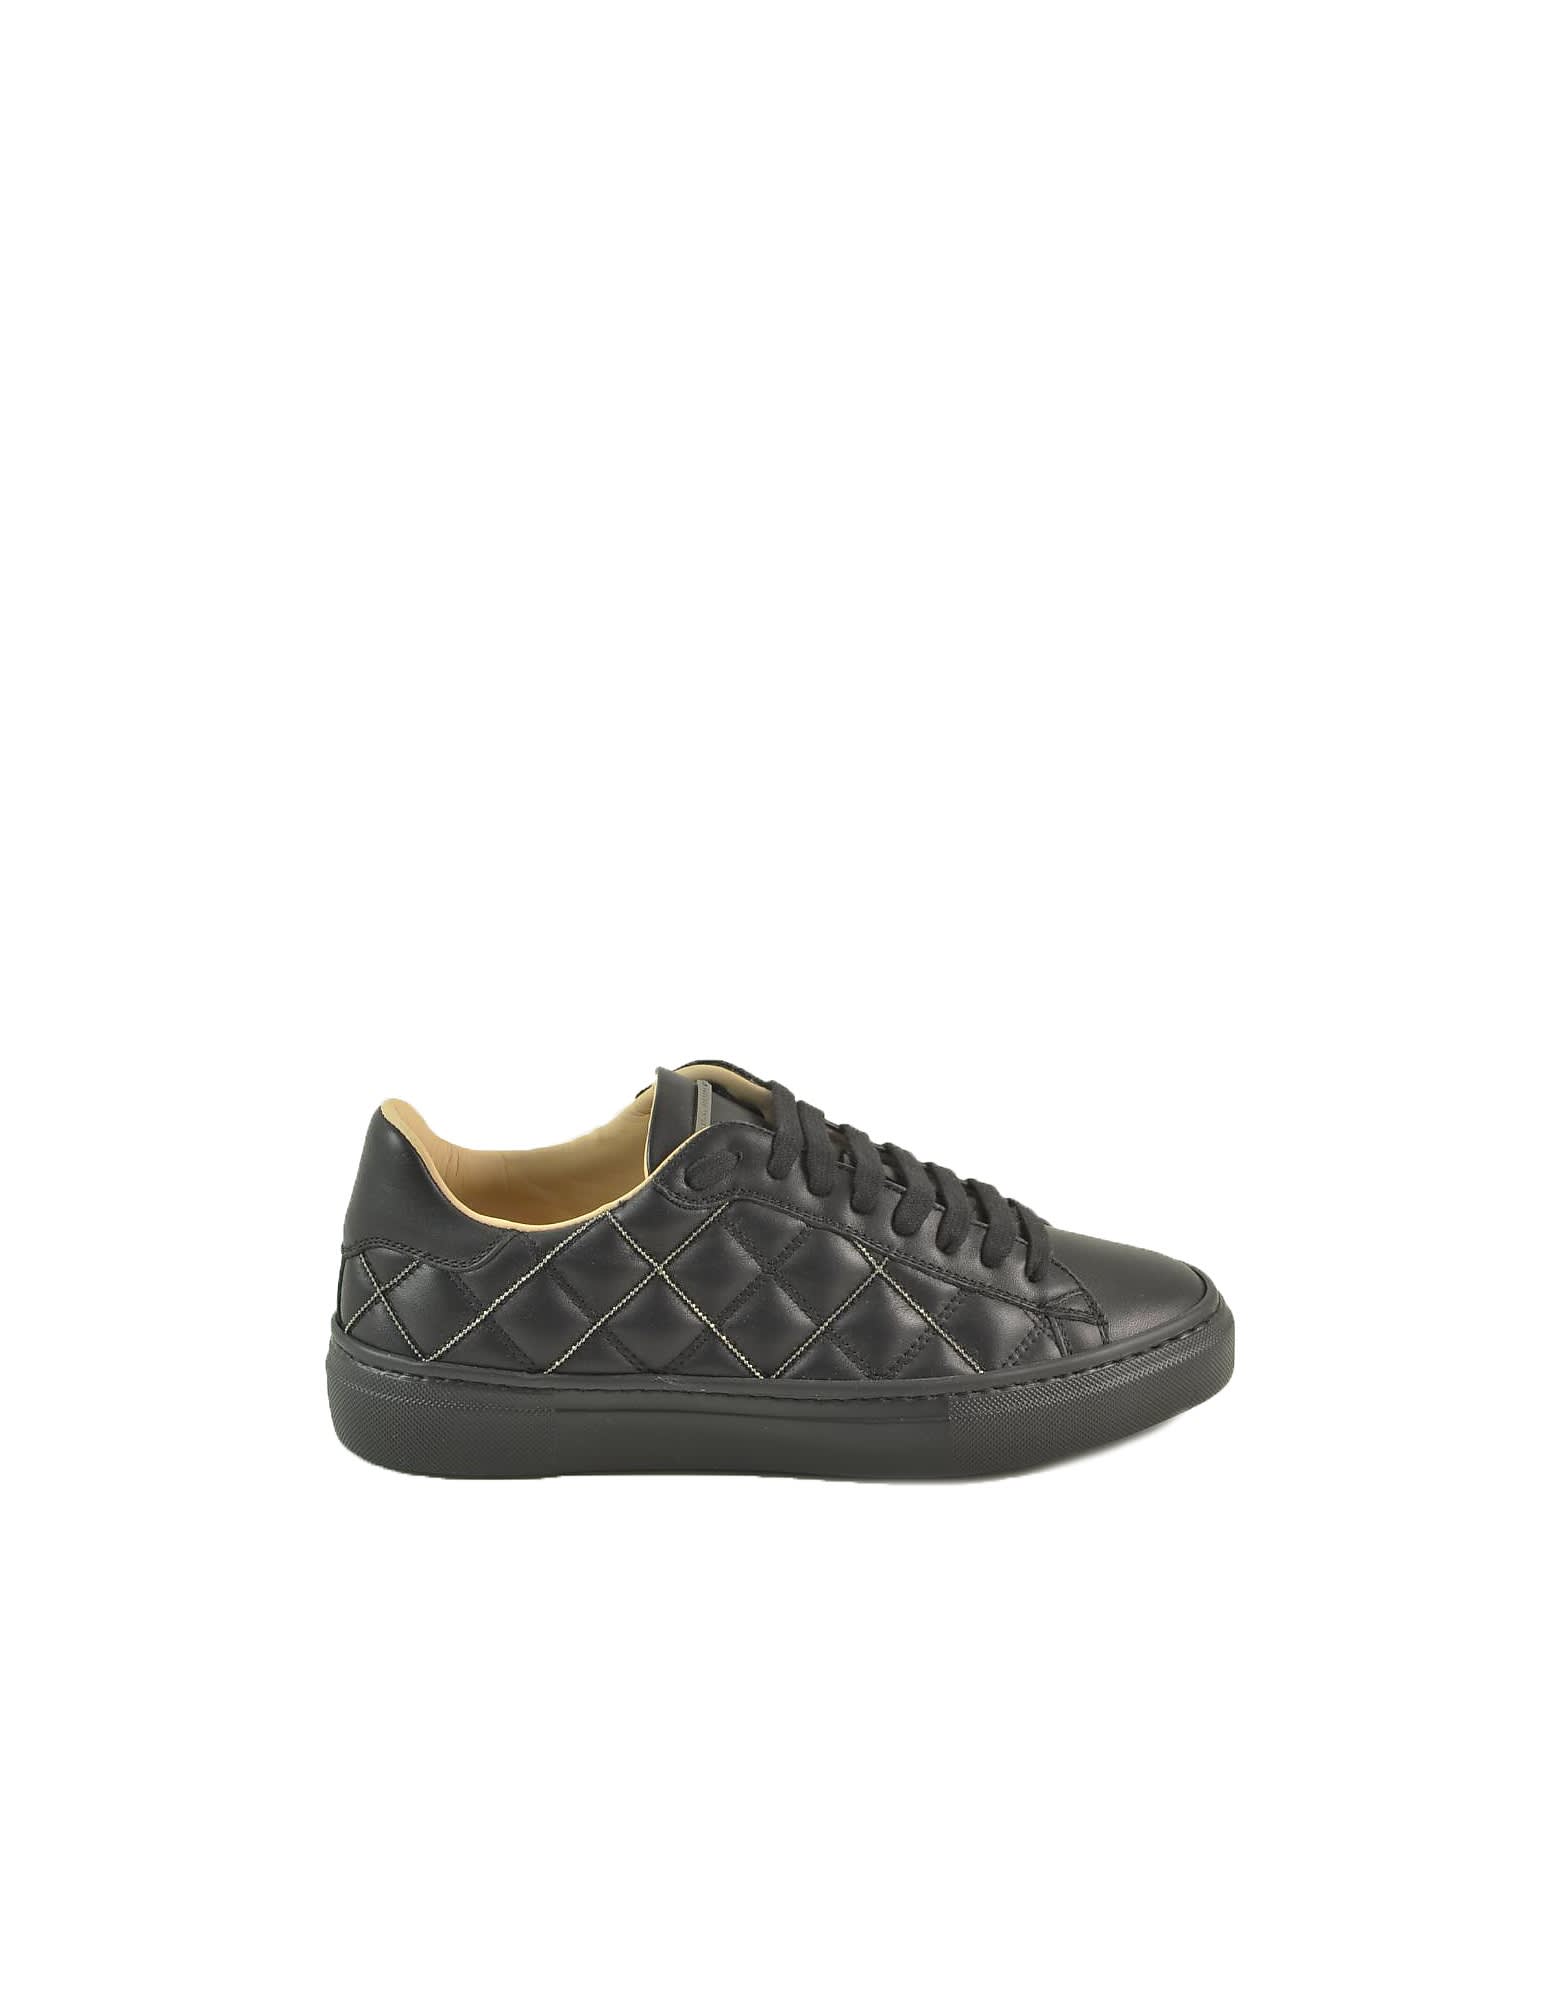 Fabiana Filippi Black Quilted Womens Flat Sneakers